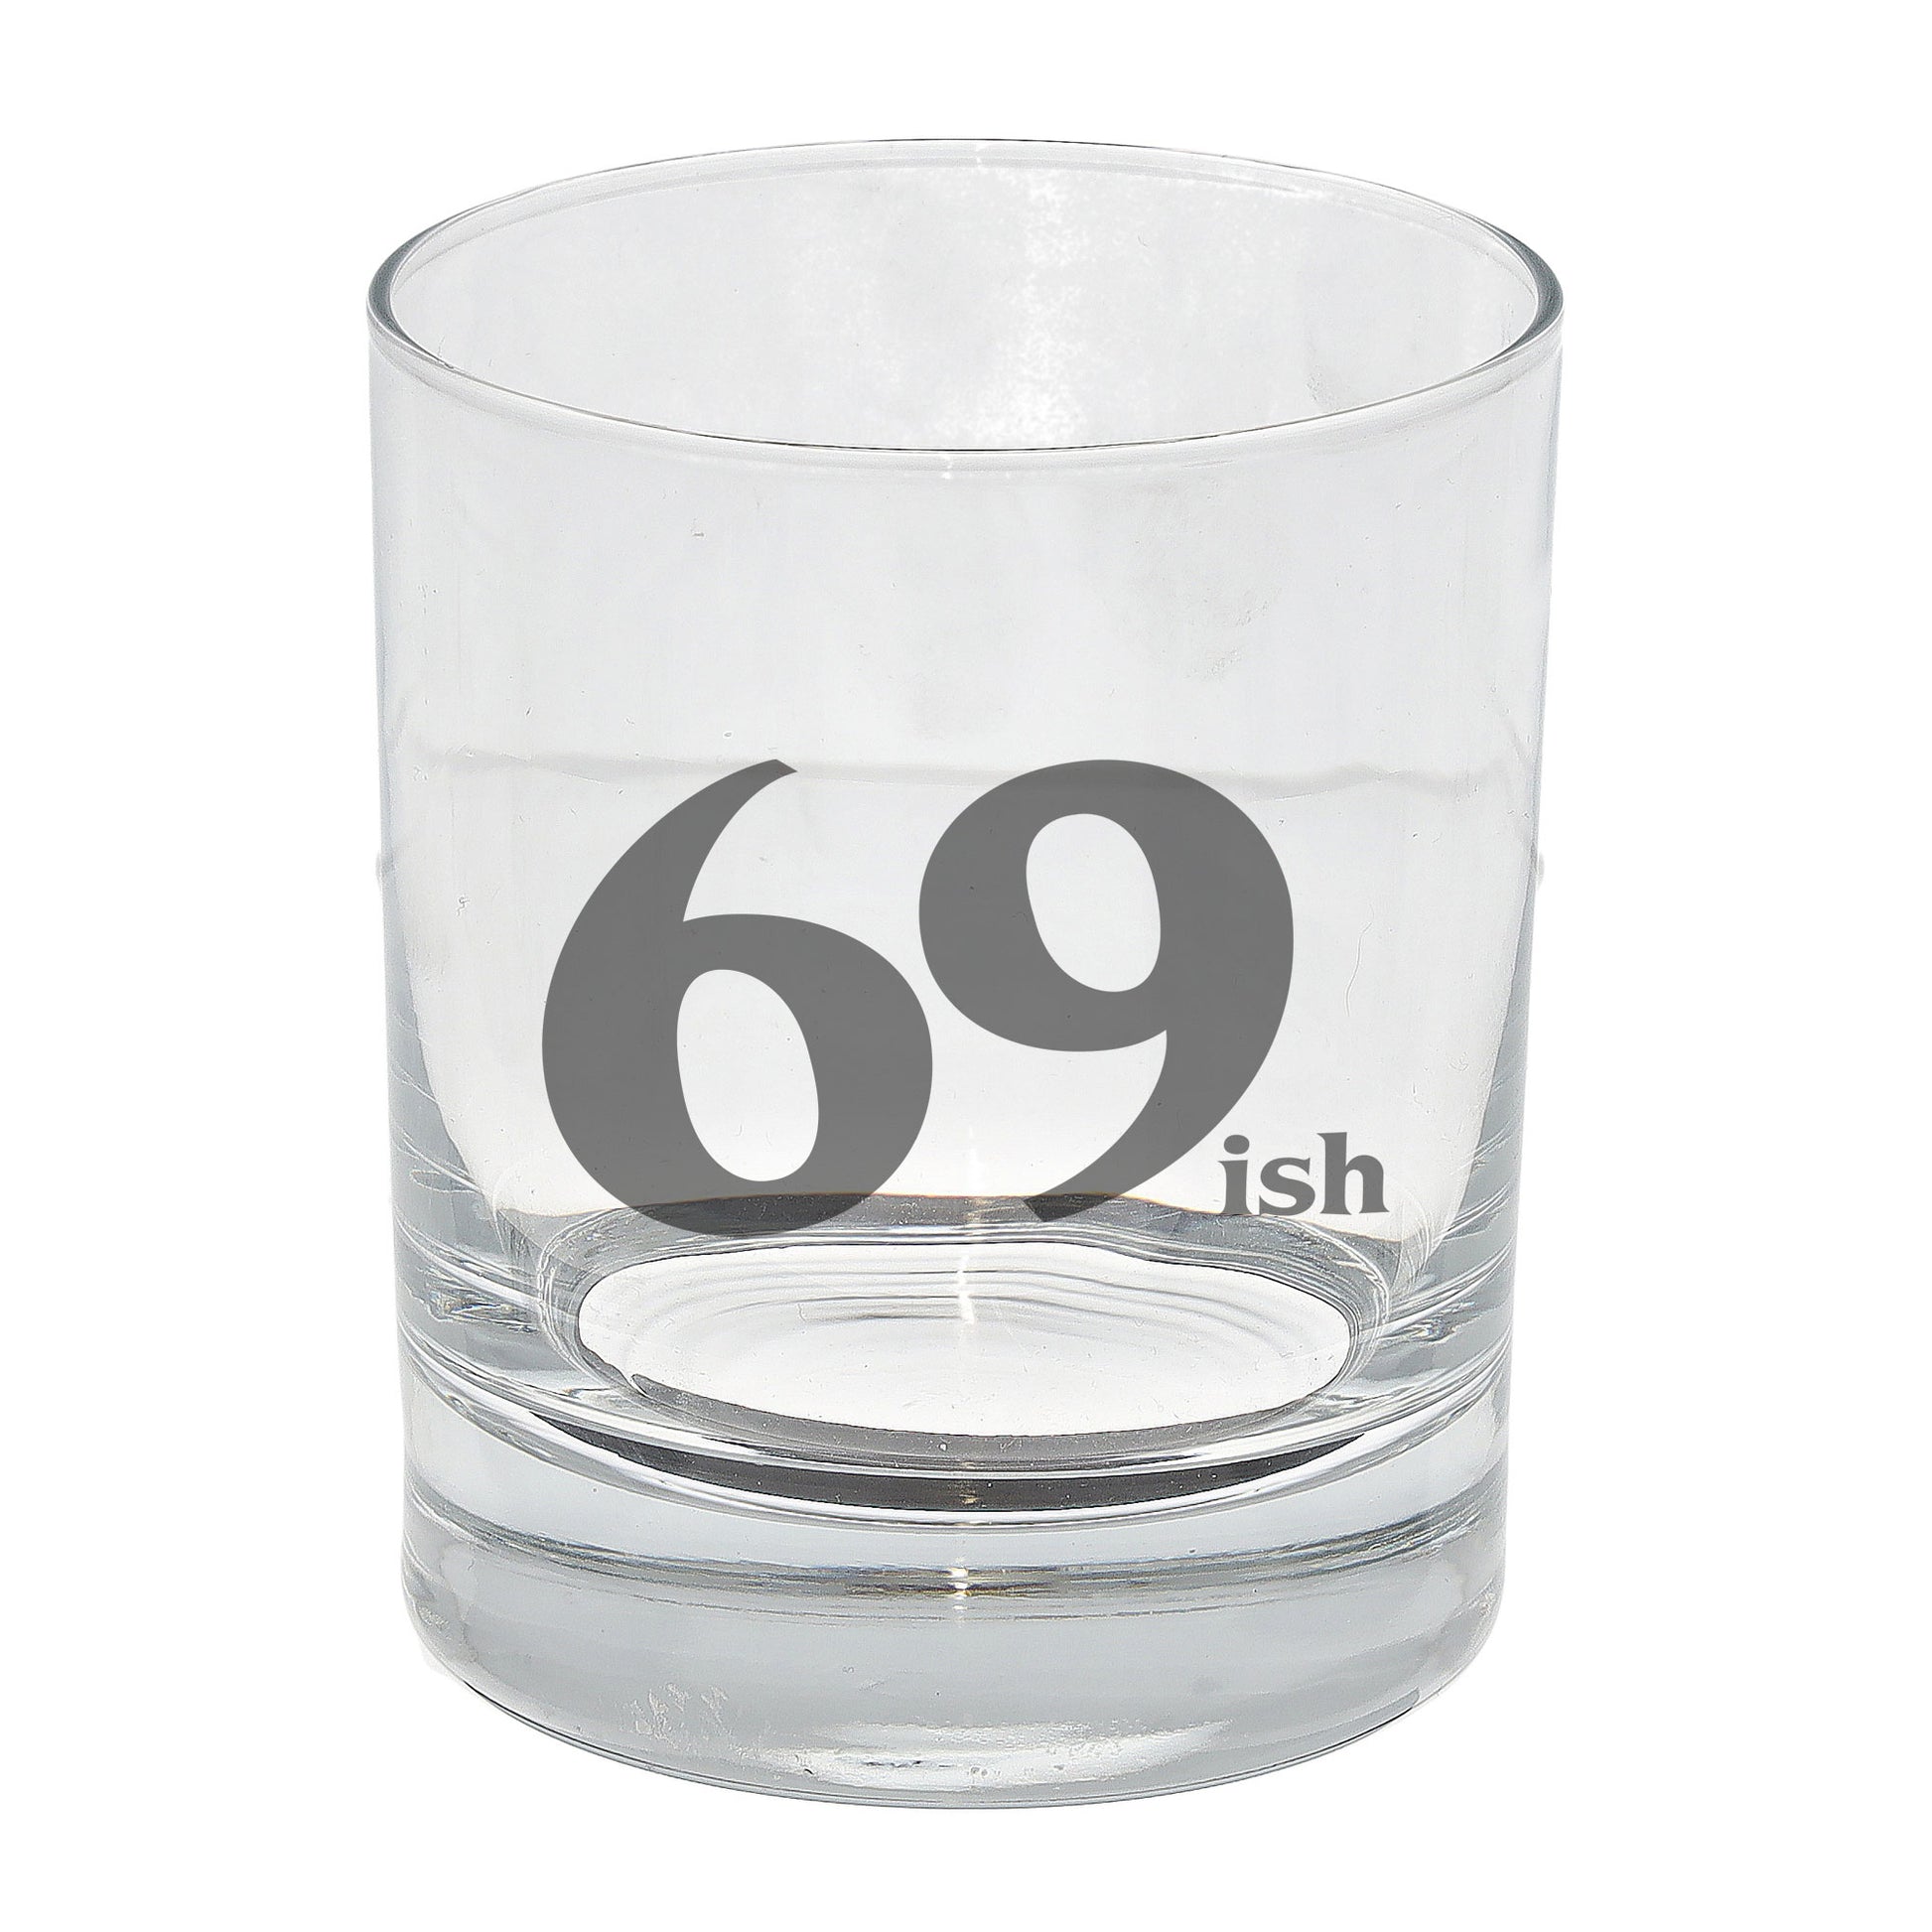 69ish Whisky Glass and/or Coaster Set  - Always Looking Good - Whisky Glass On Its Own  